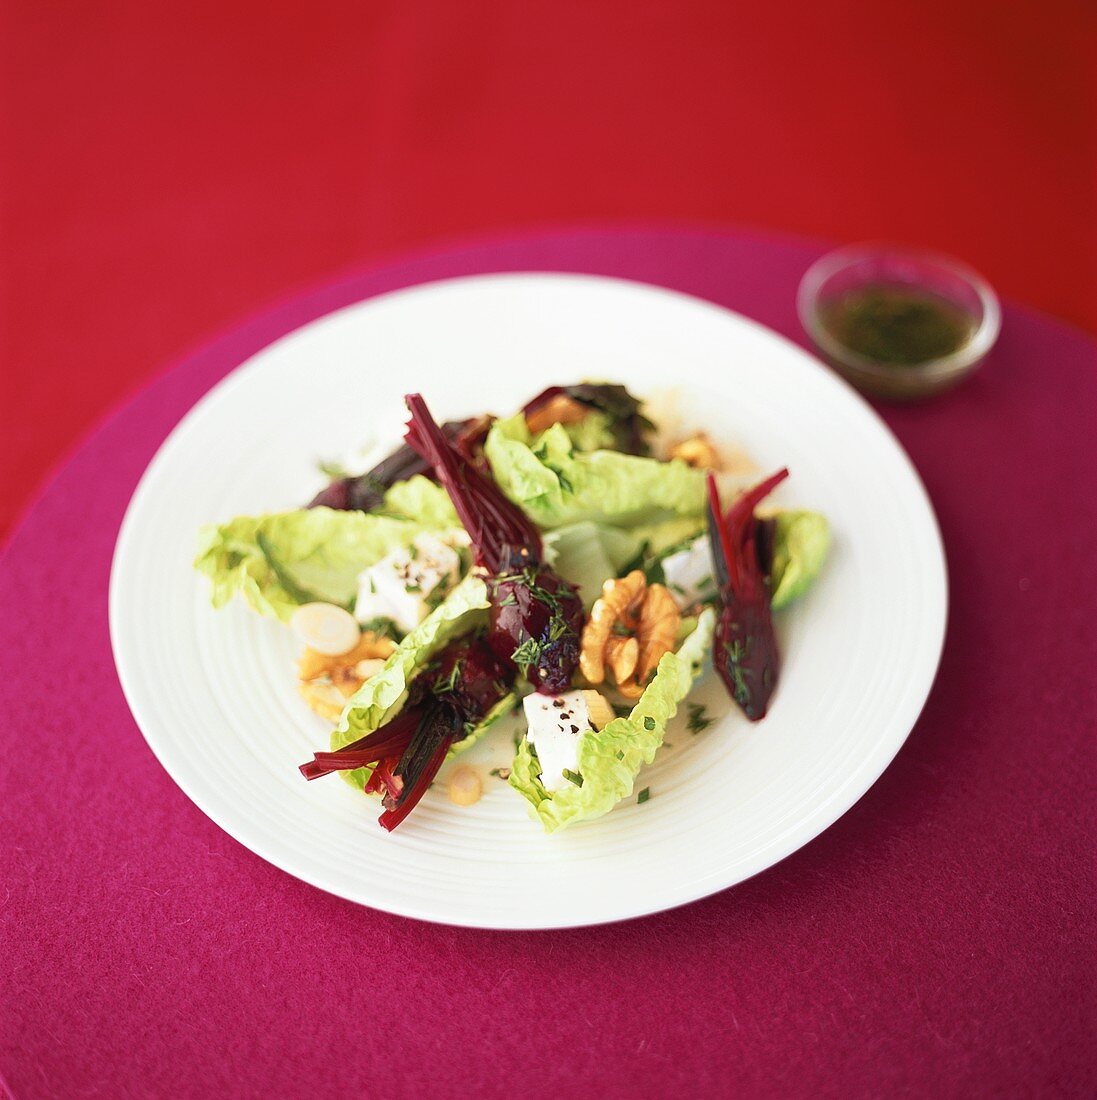 Lettuce with beetroot, sheep's cheese and walnuts